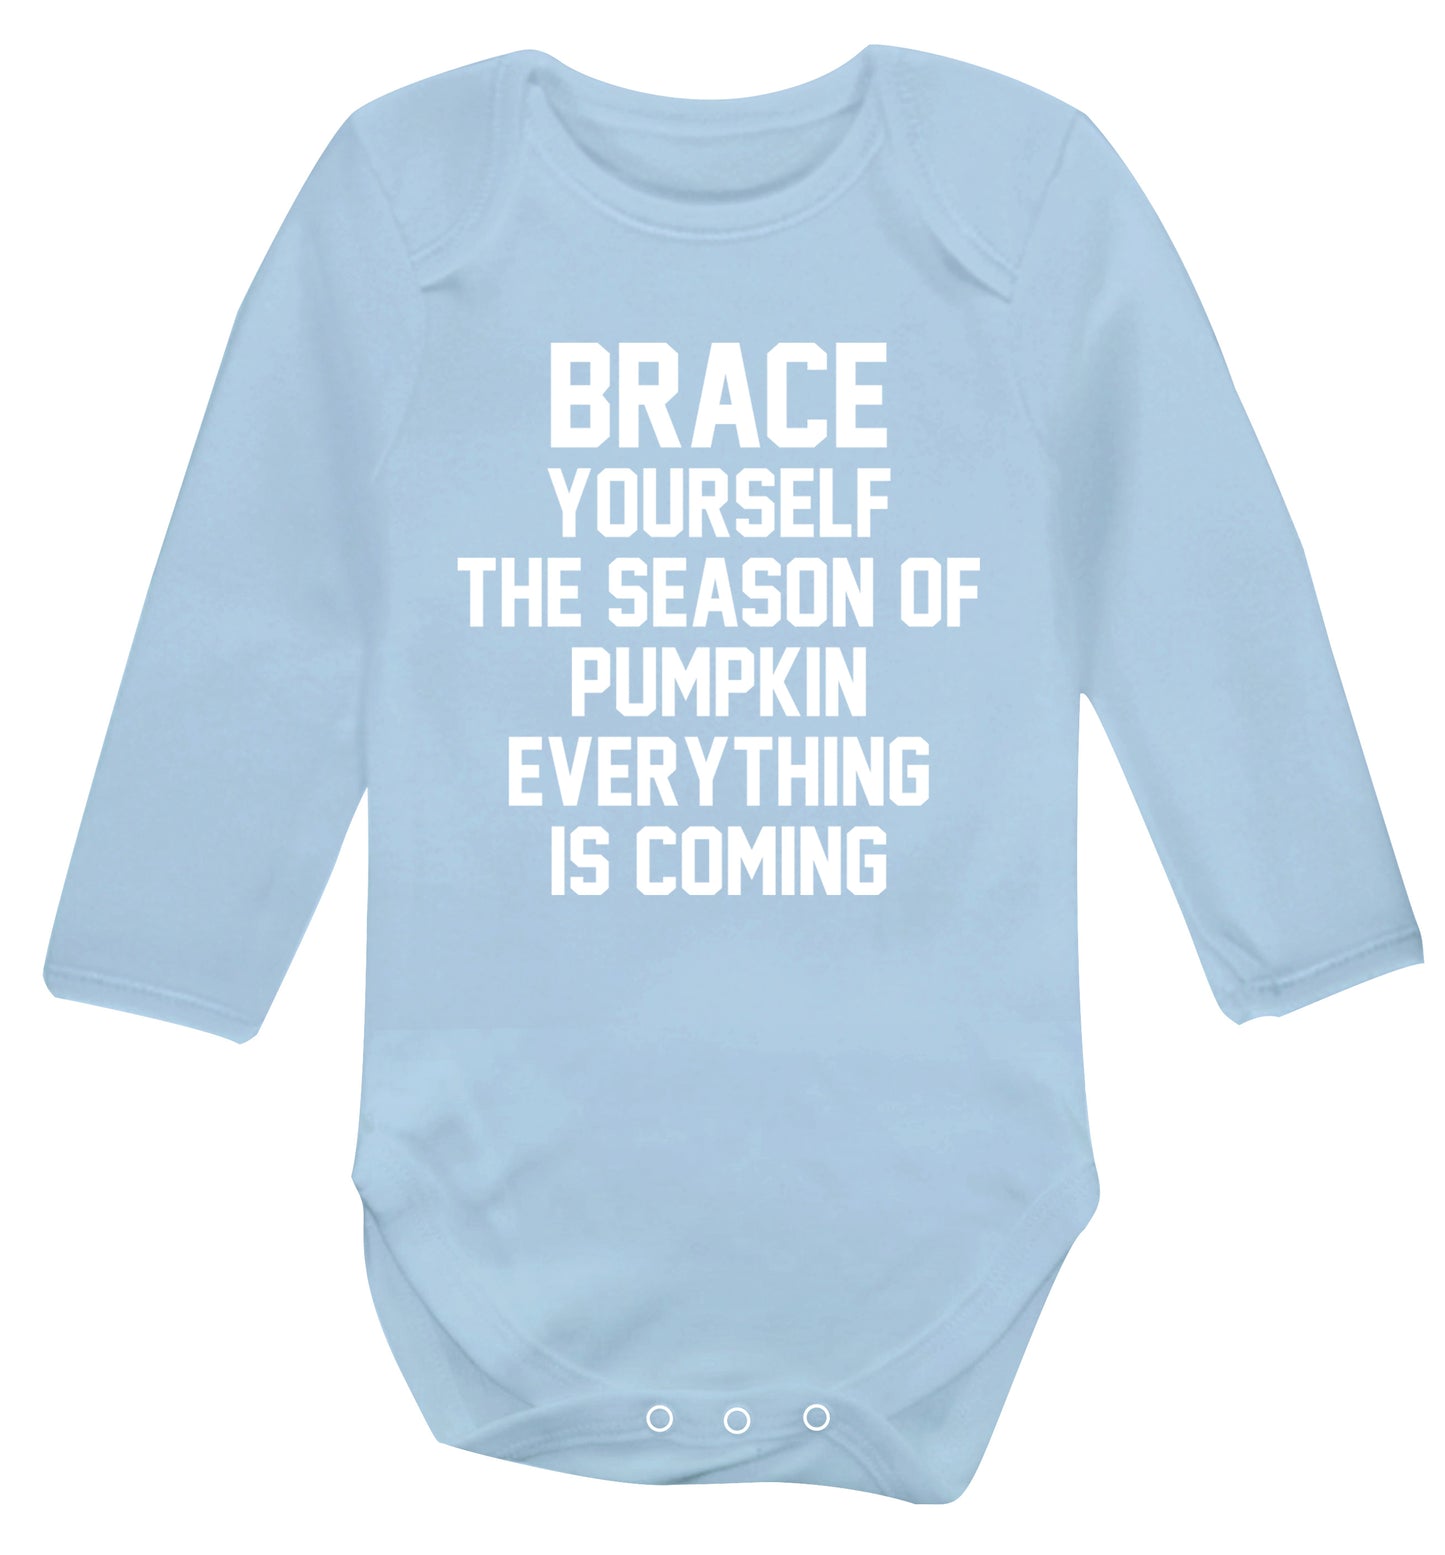 Brace yourself the season of pumpkin everything is coming Baby Vest long sleeved pale blue 6-12 months